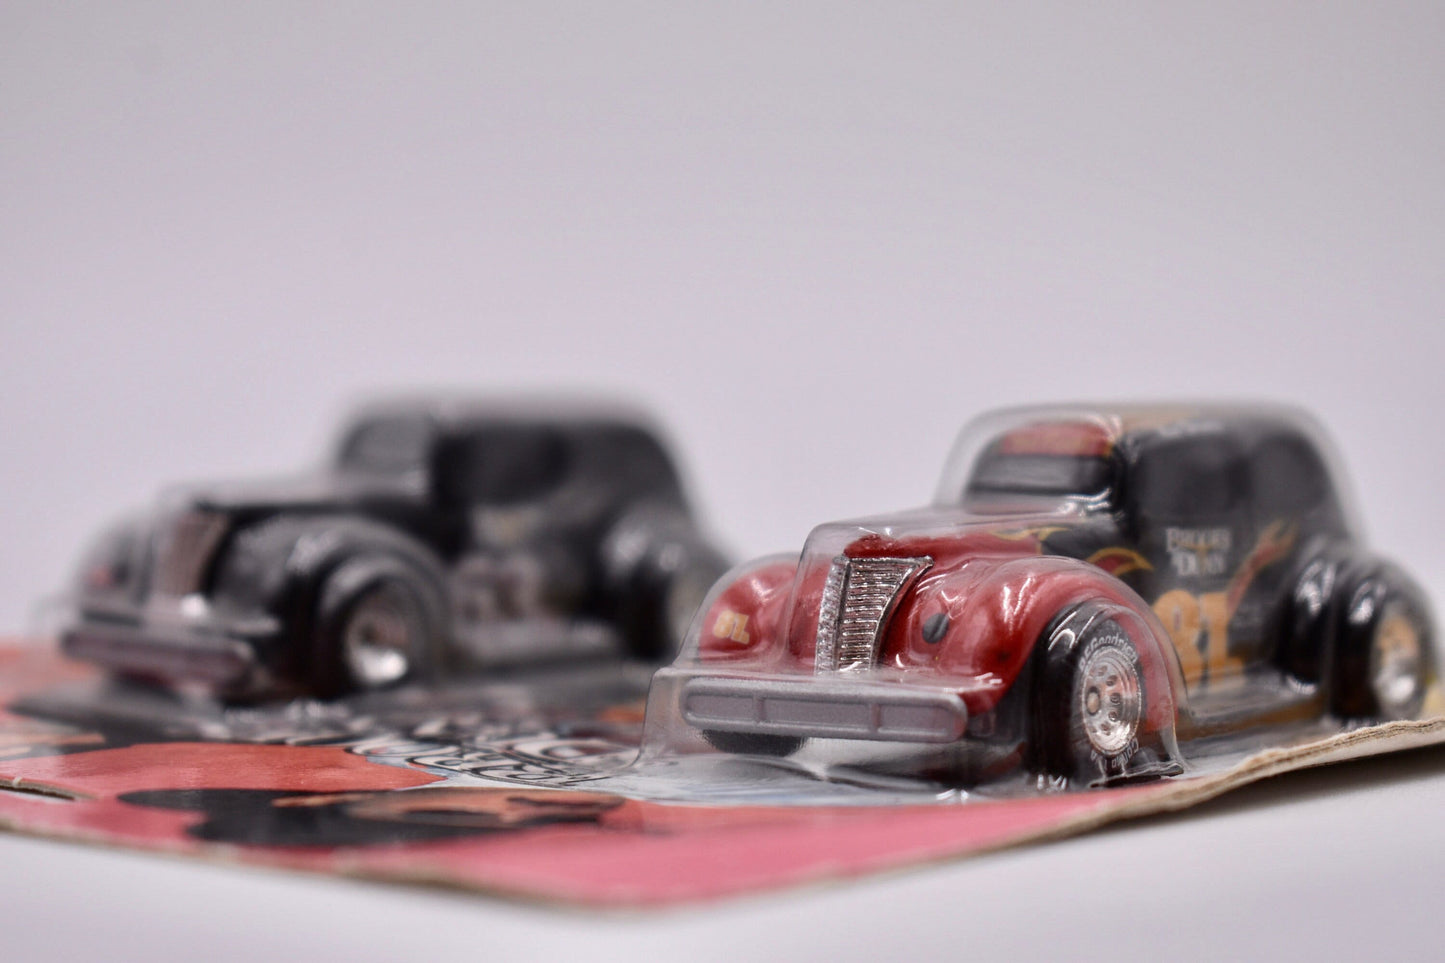 Brooks and Dunn Metal Rodeo Legends Racing Cars Black and Red Nascar Perfect Birthday Gift Miniature Collectable Scale Model Toy Car